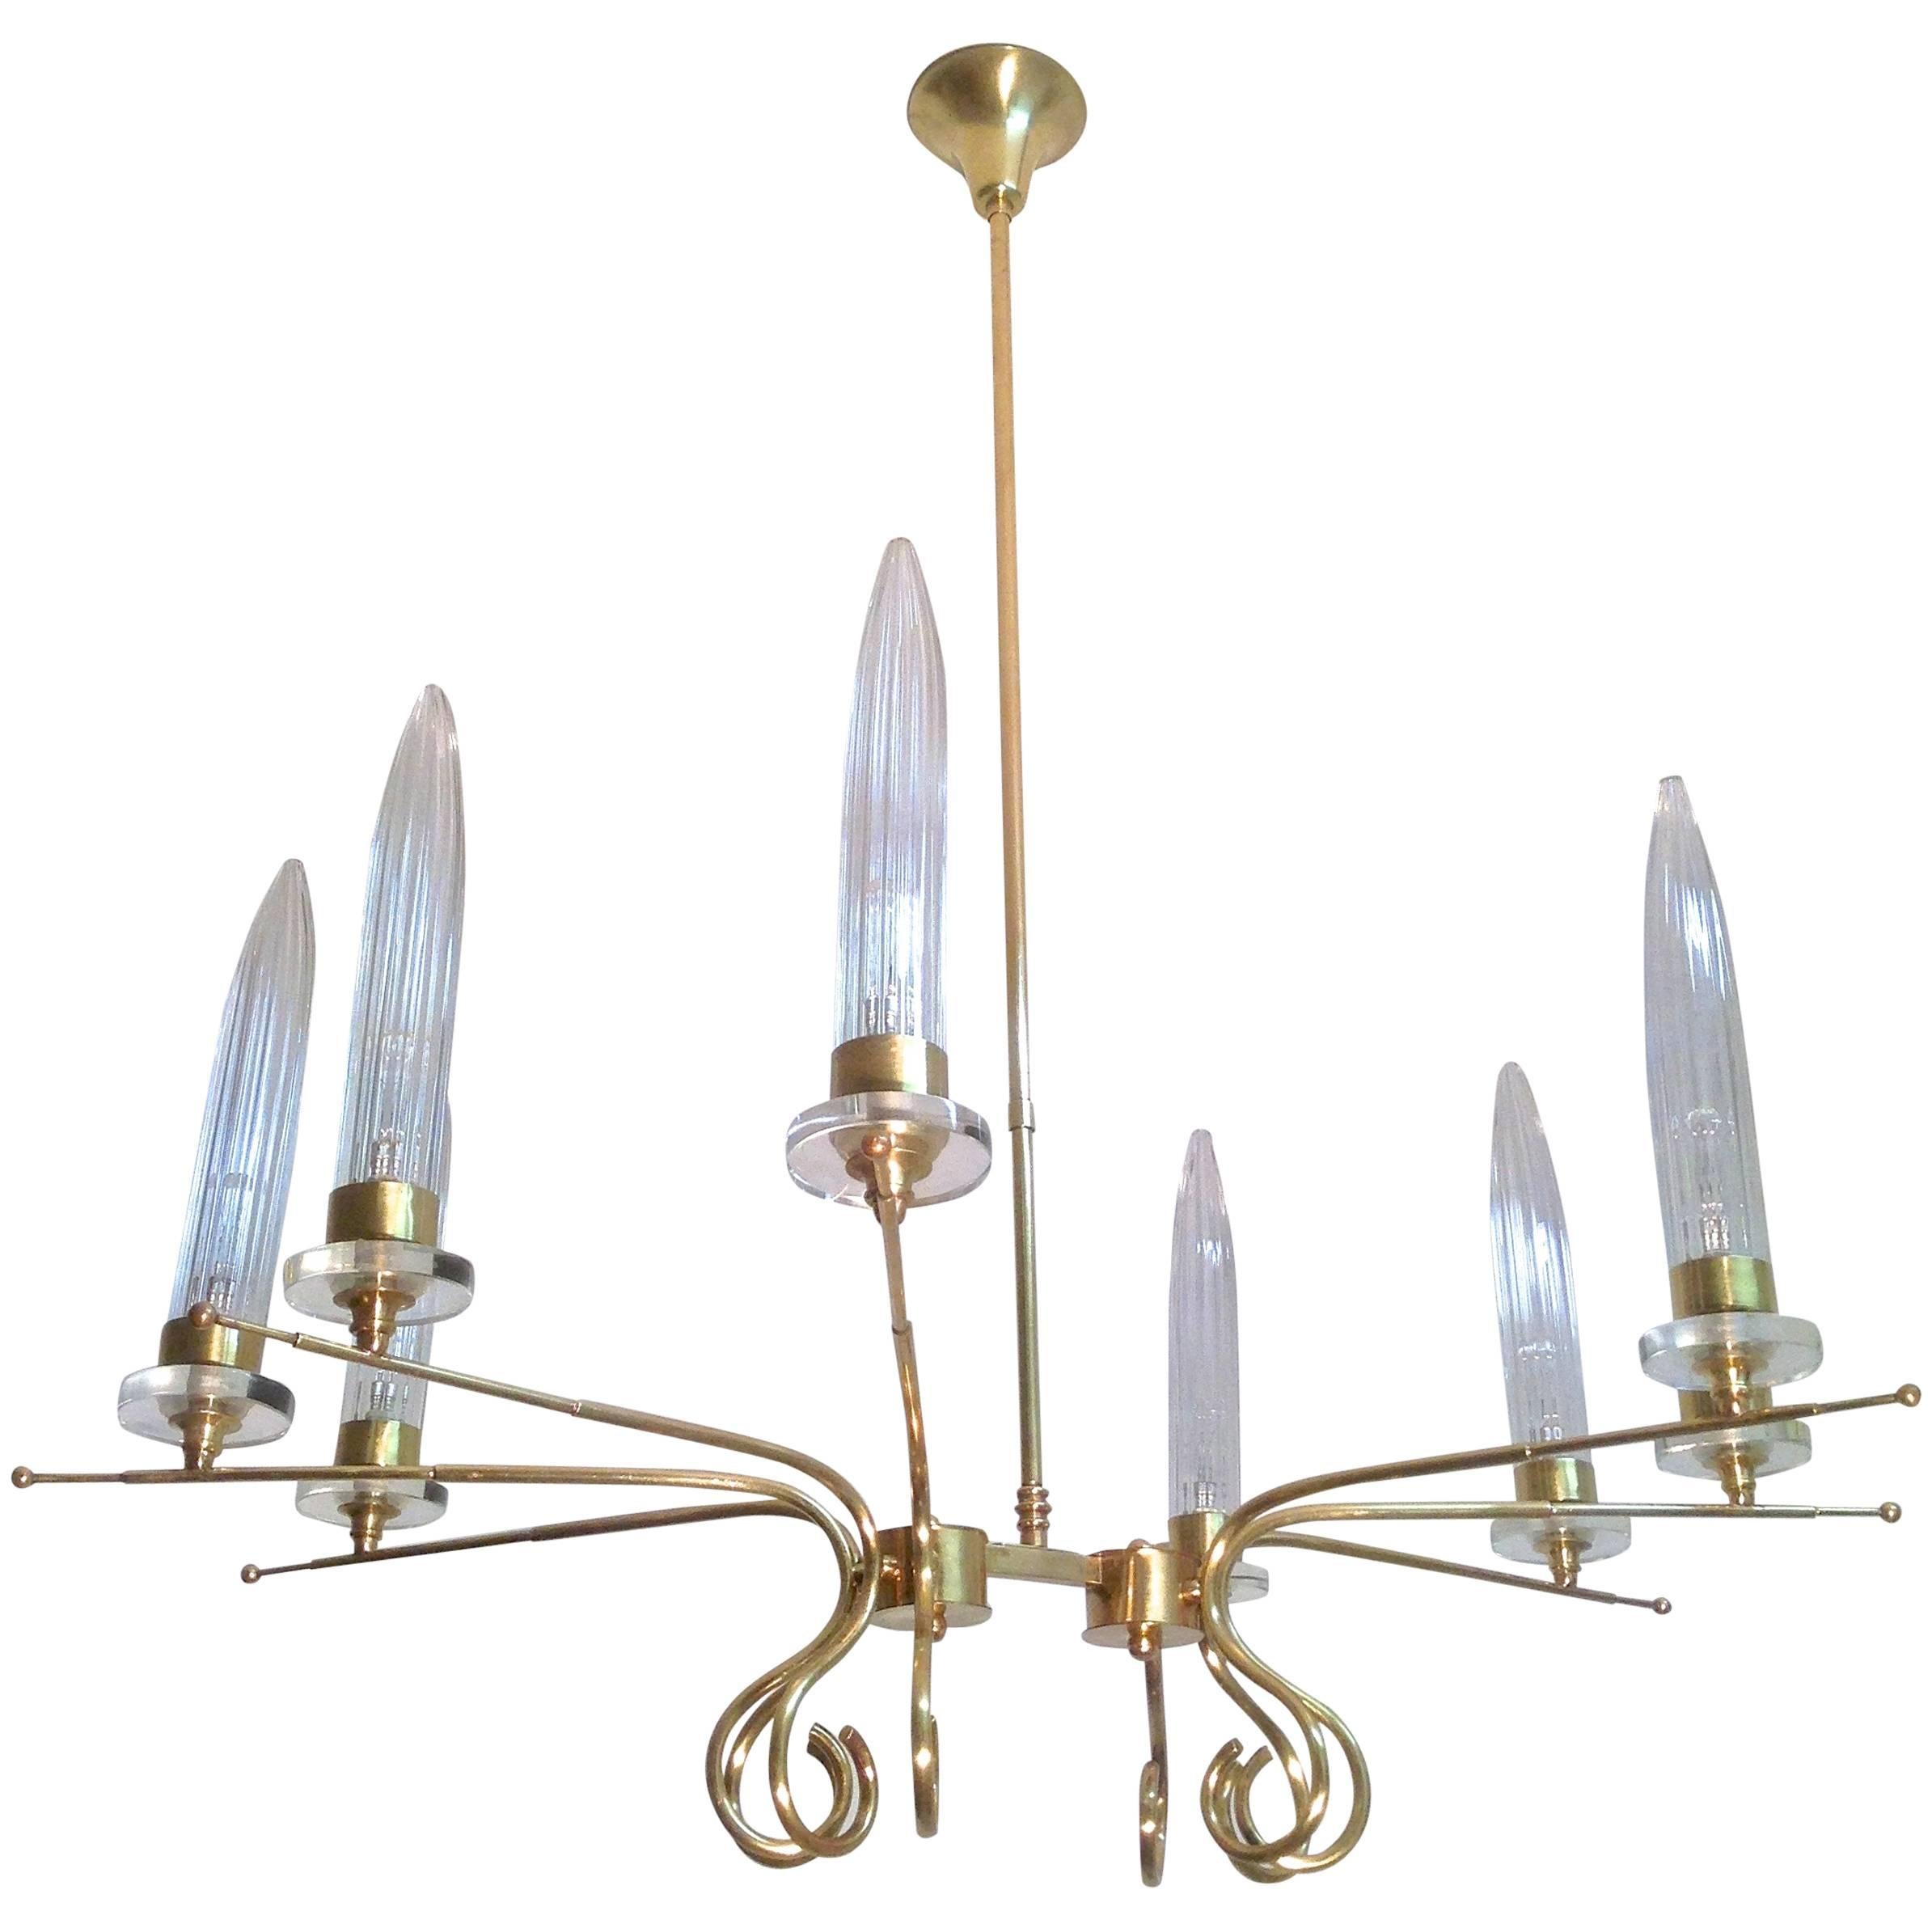  Brass Italian Duo Chandelier With Tall Glass Cone Shaped Diffusers For Sale